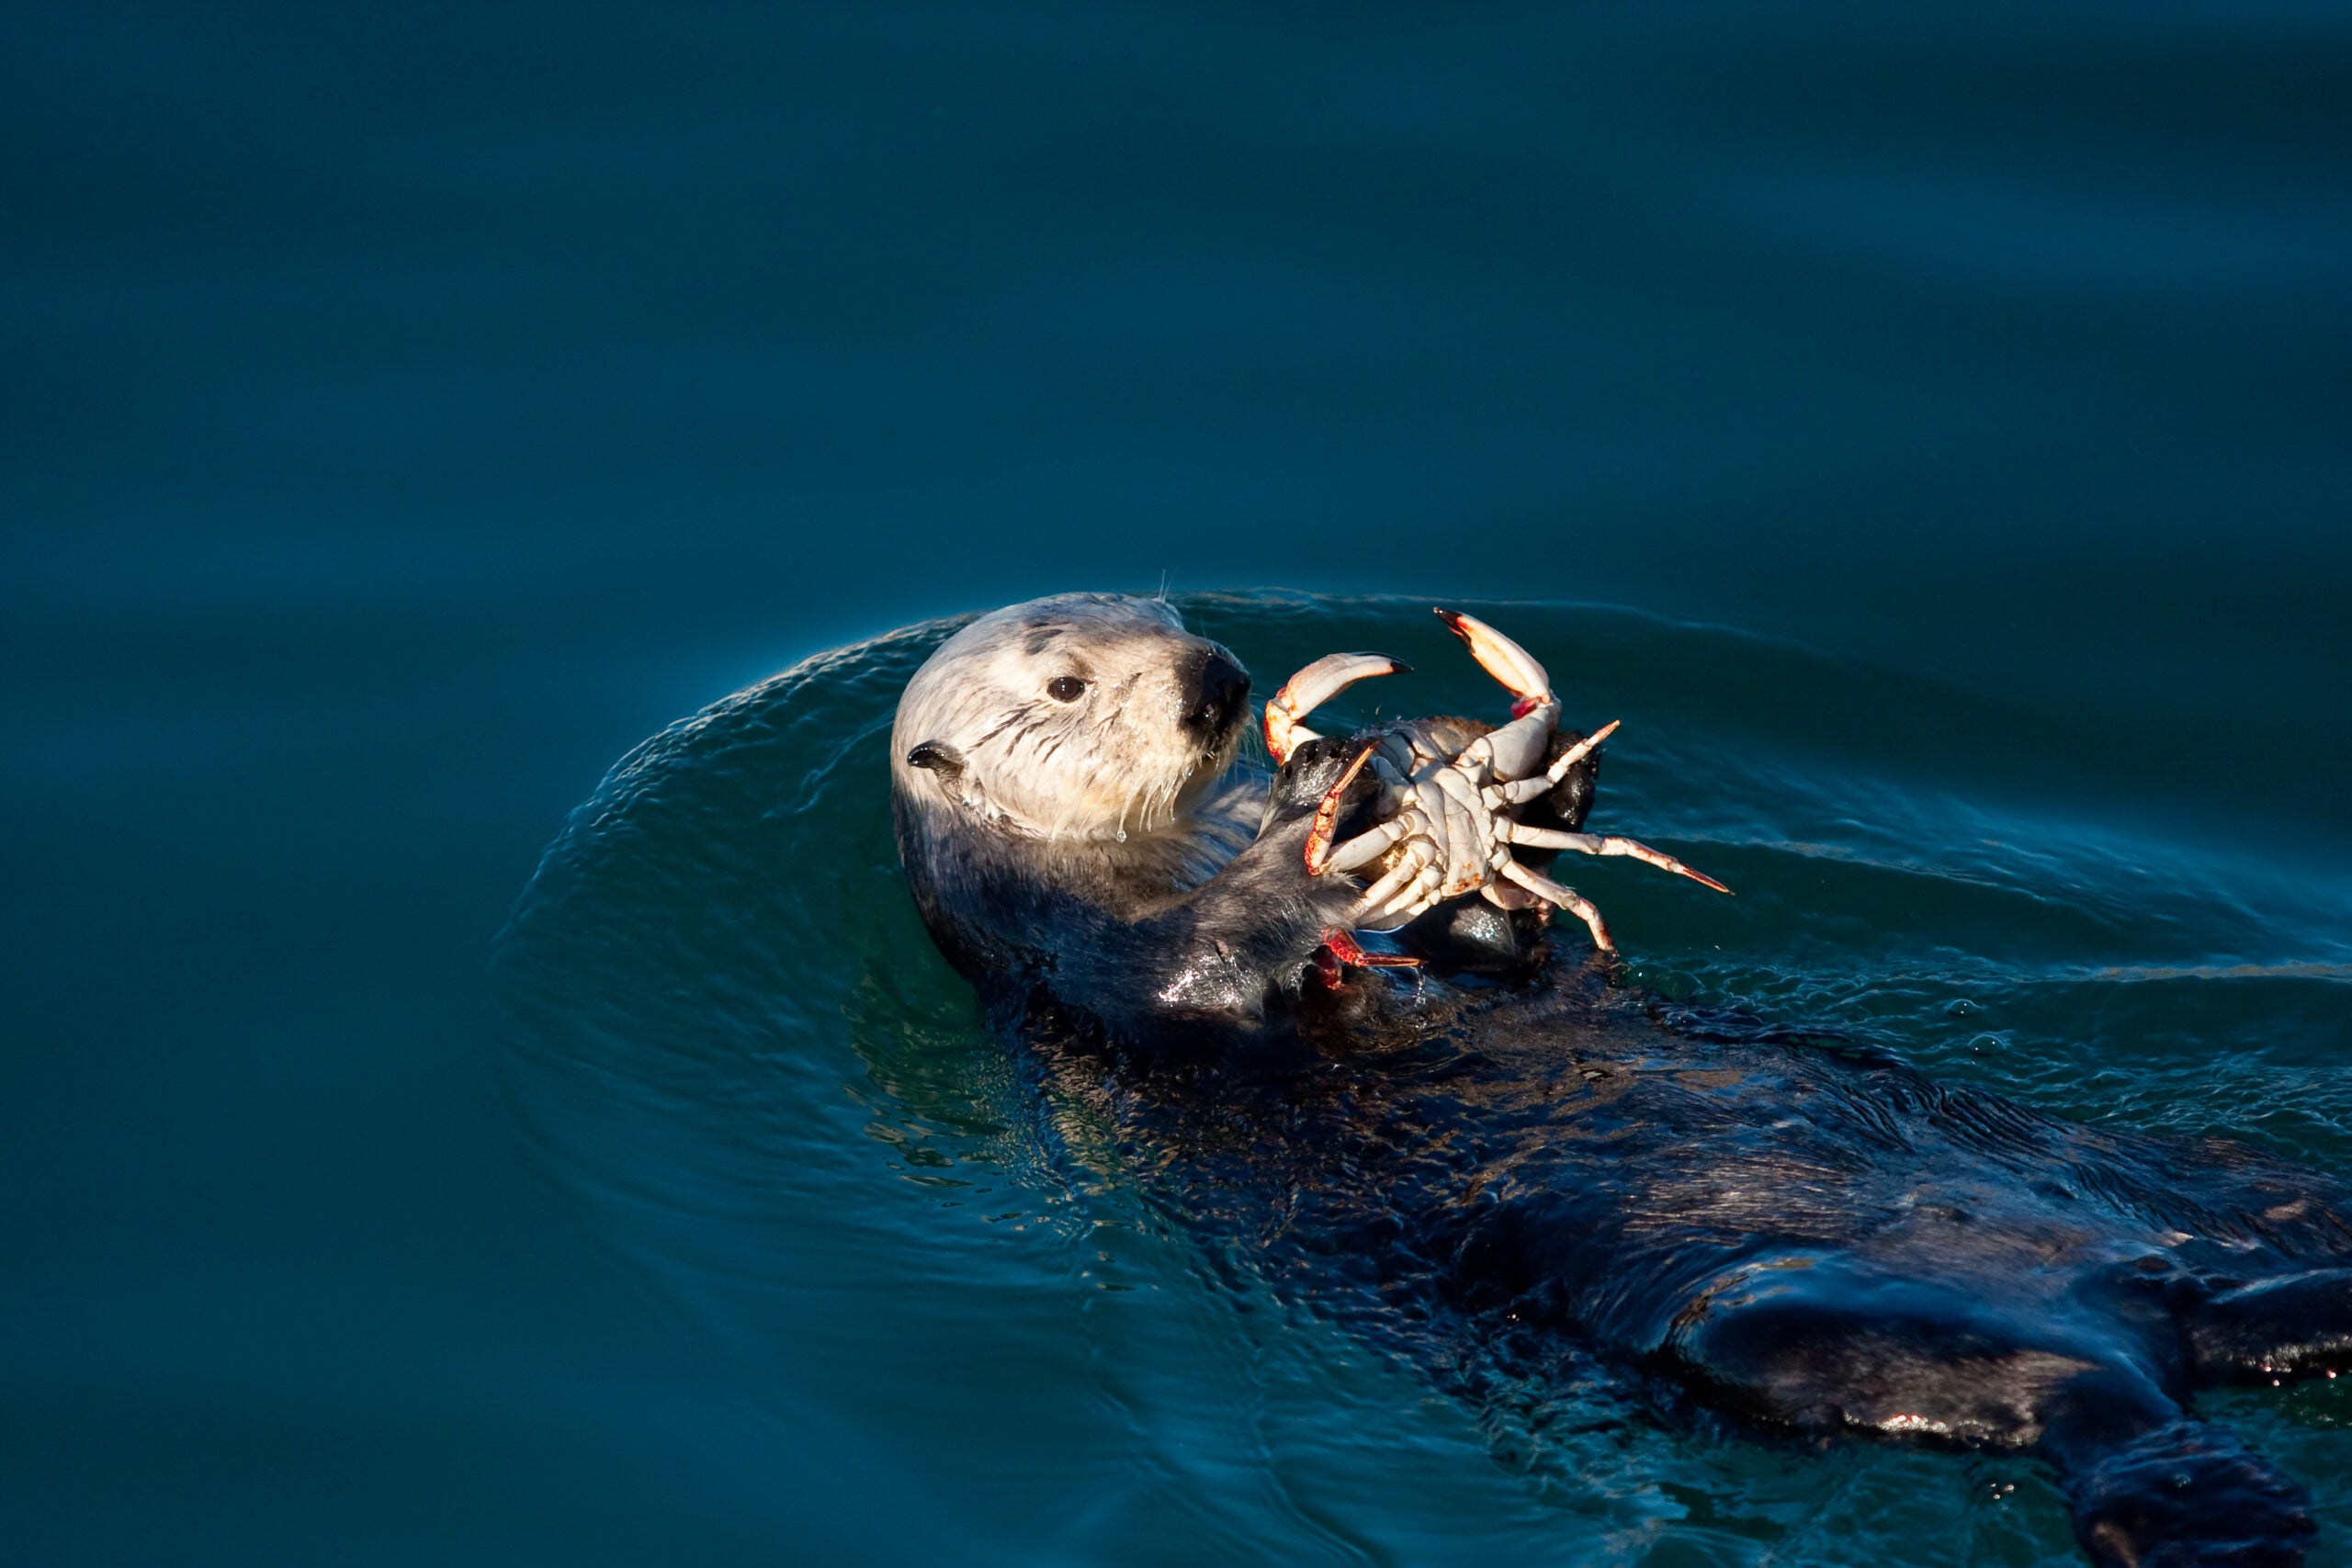 Sea otter dines on a crab.